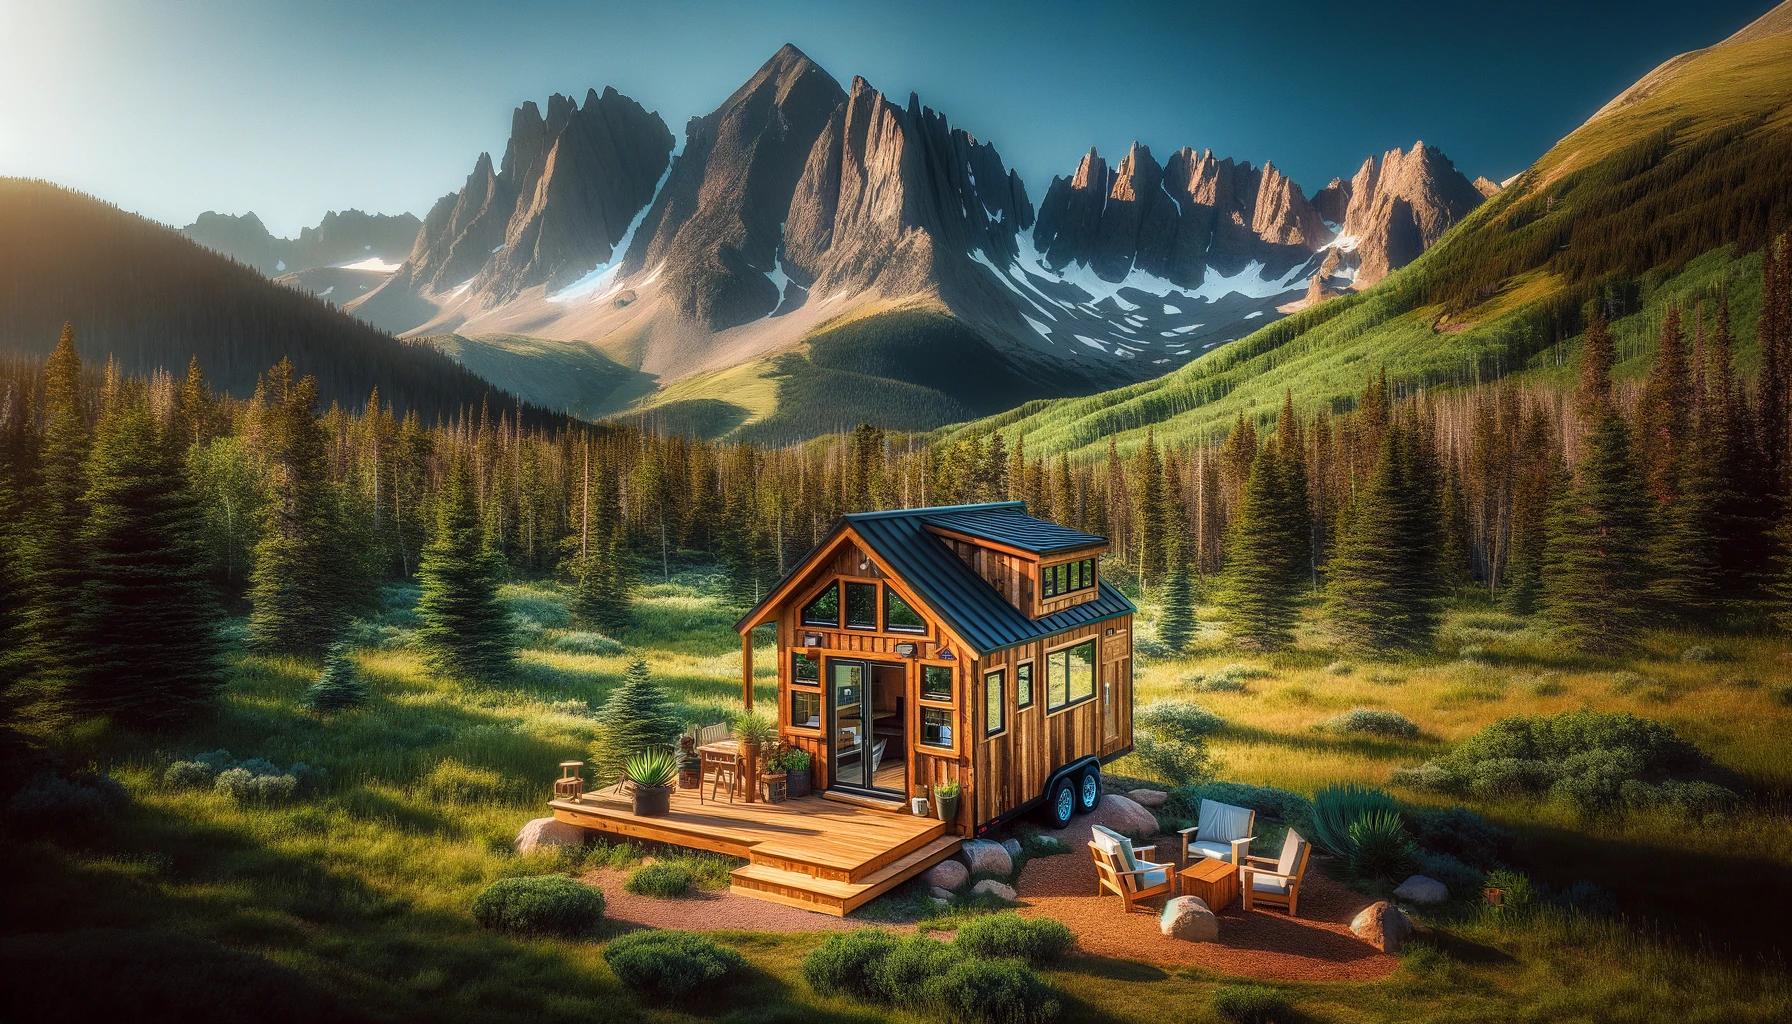 Tiny Houses For Rent in Colorado on Airbnb